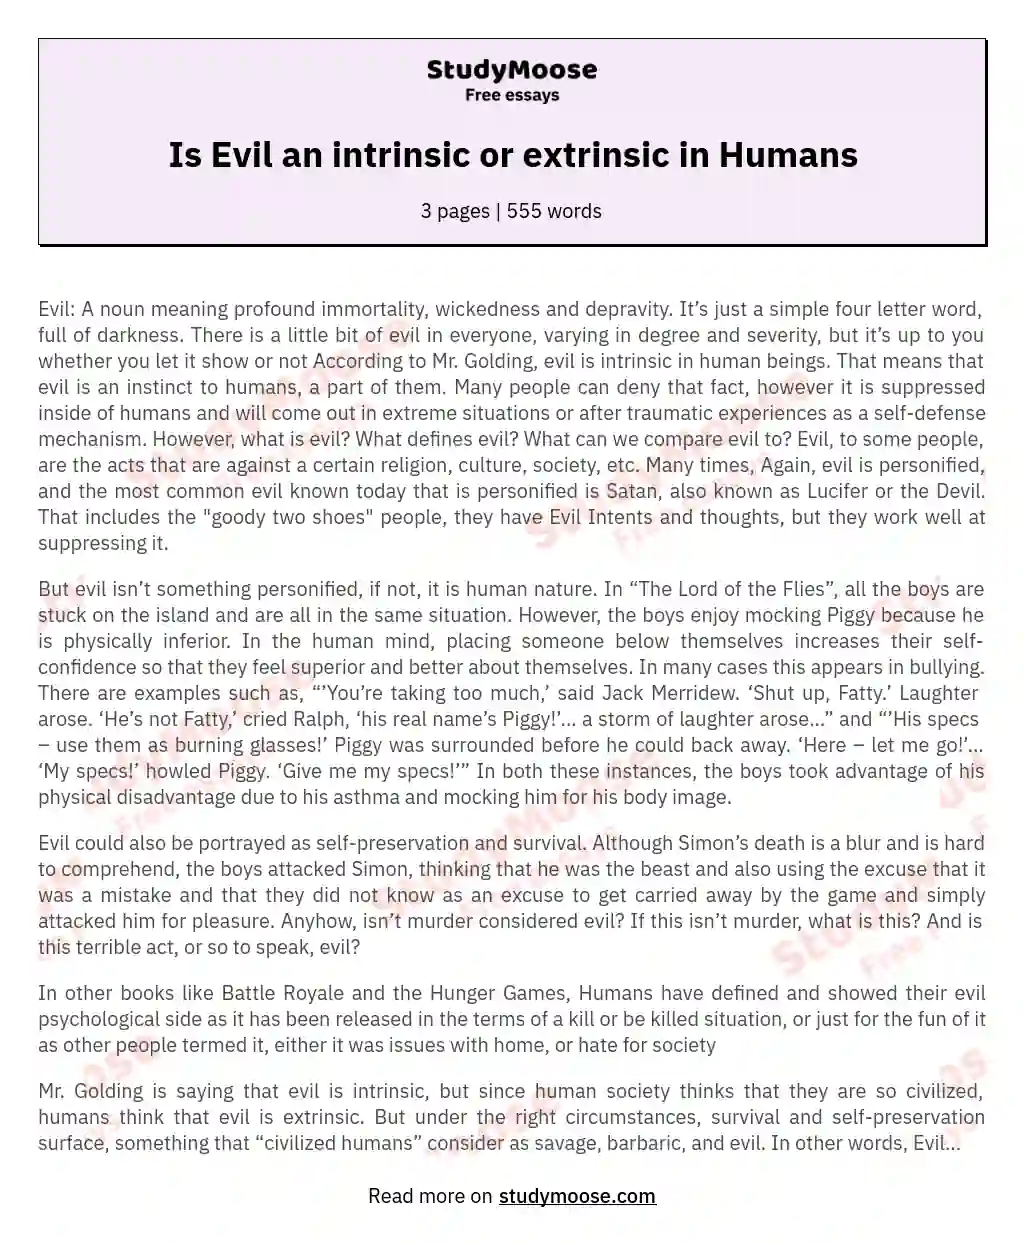 Is Evil an intrinsic or extrinsic in Humans